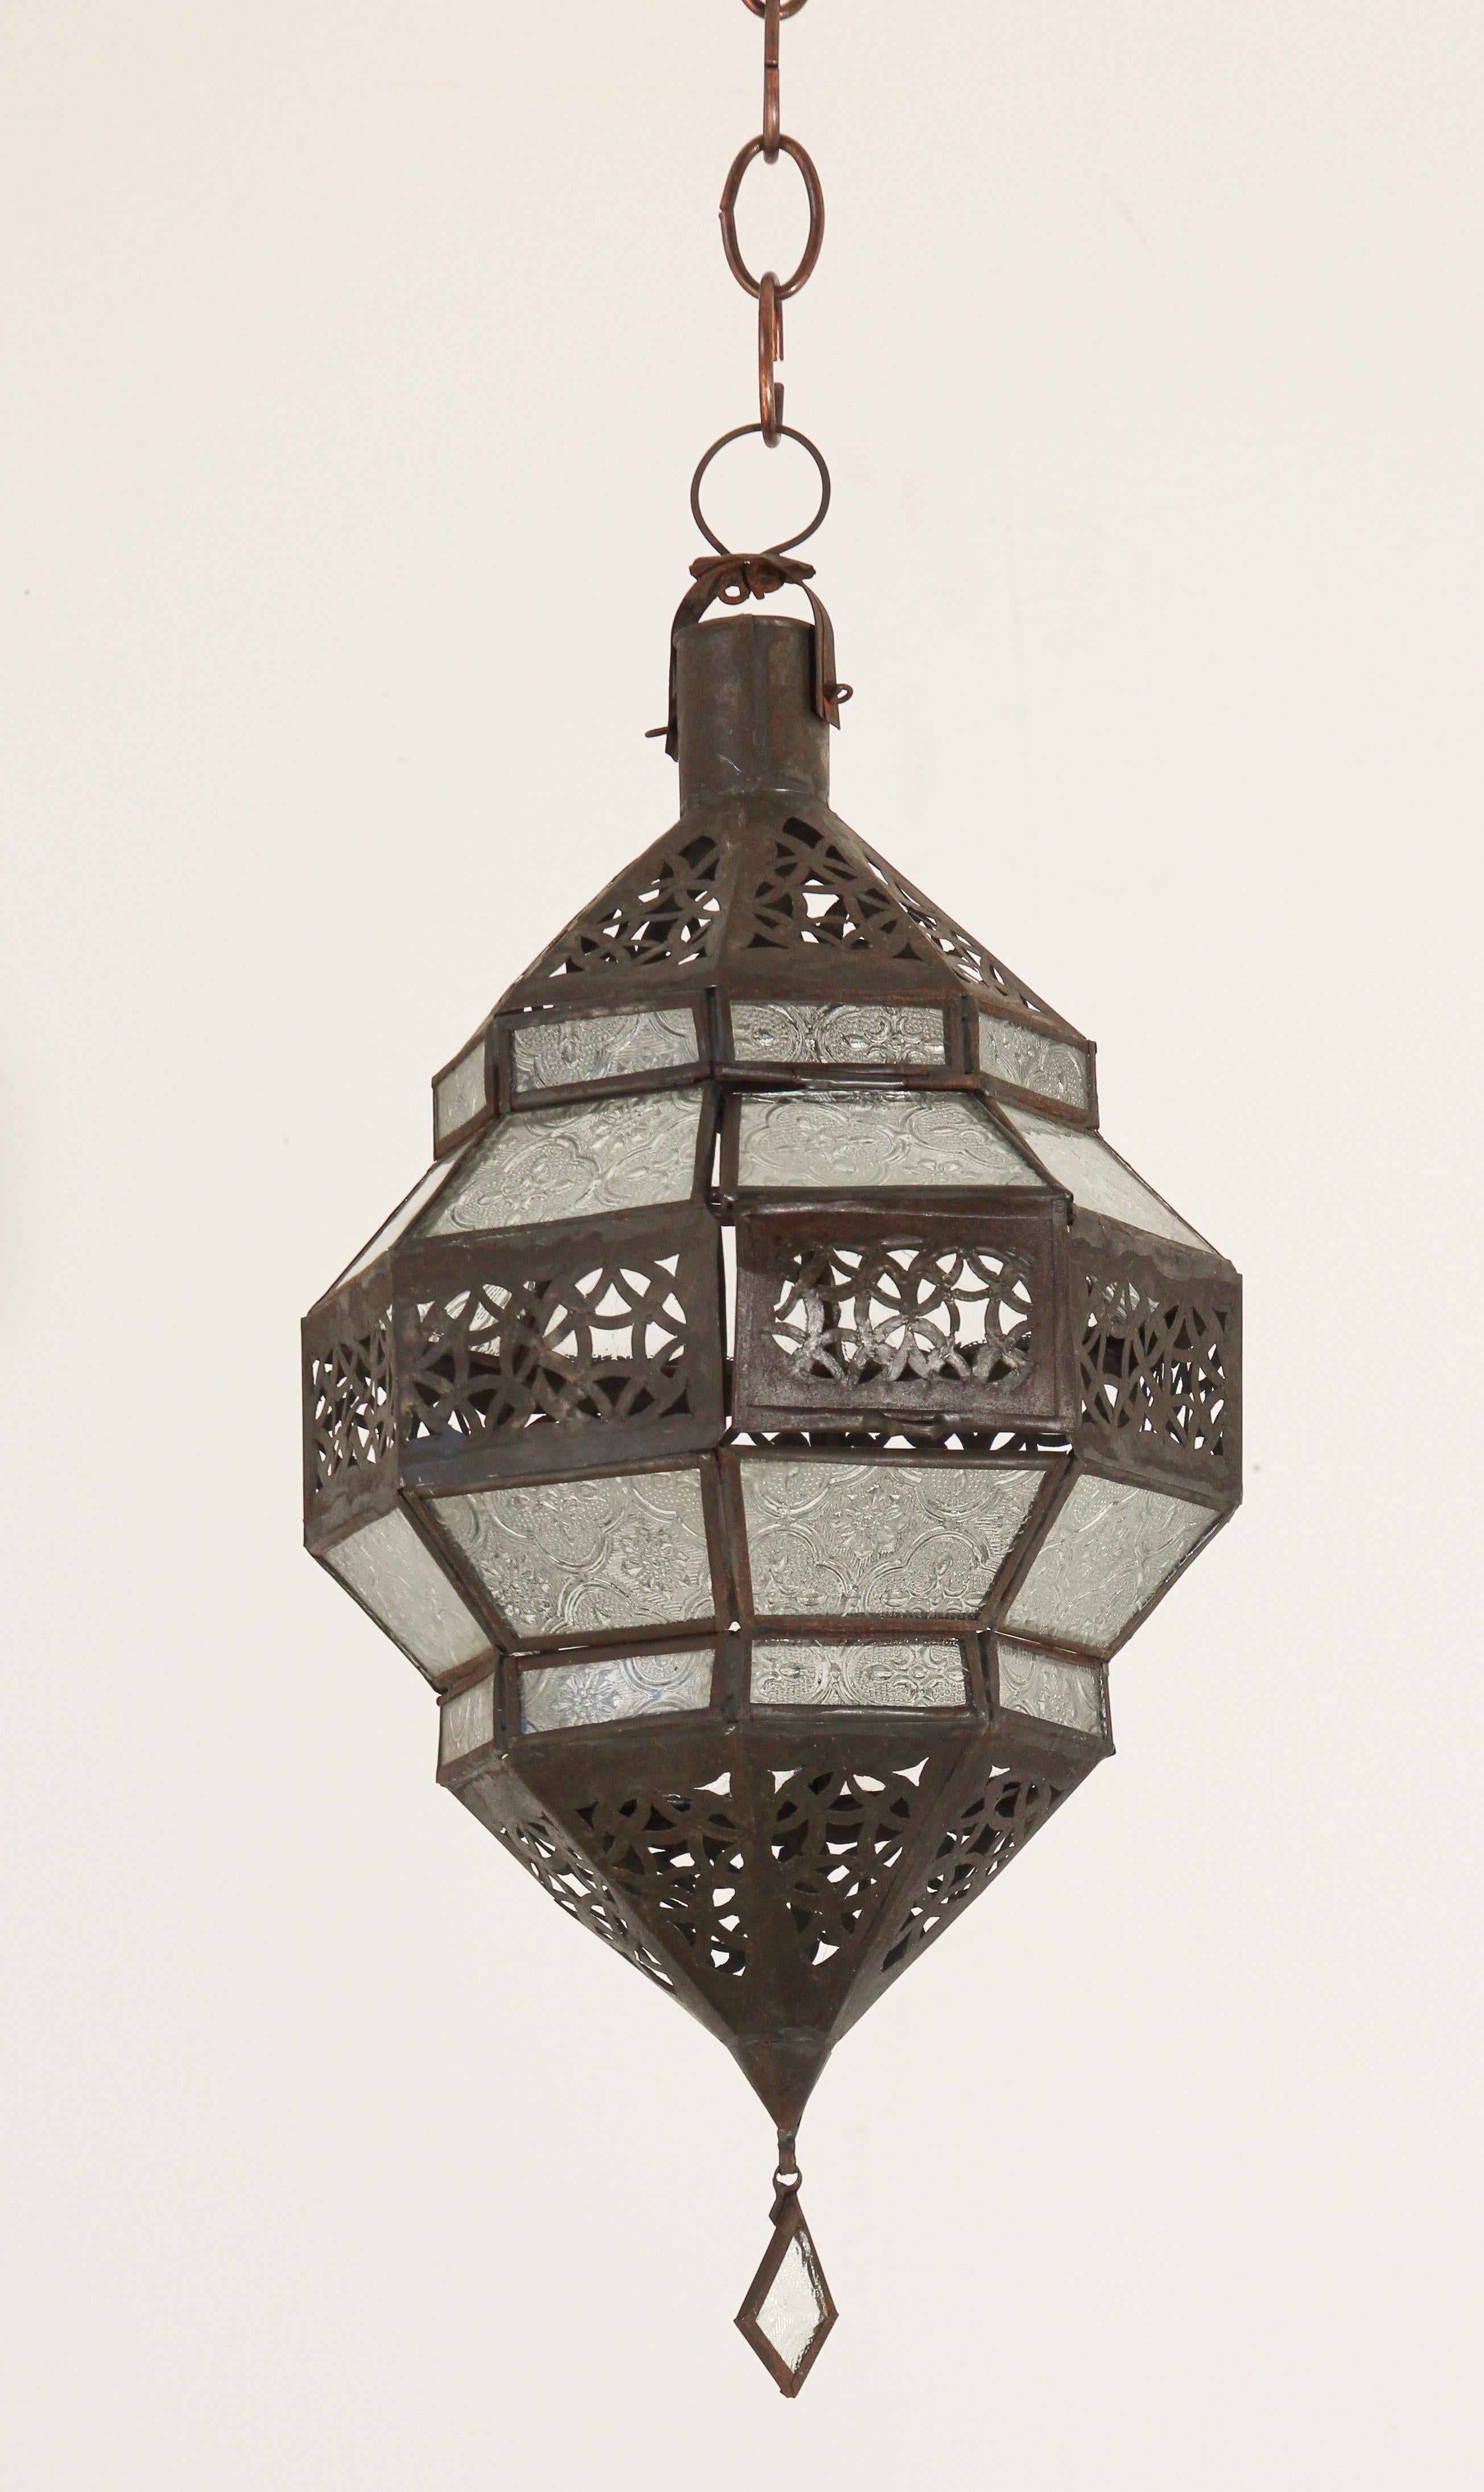 Moroccan metal and clear frosted glass lantern.
Moroccan lantern in octagonal shape with rust color metal finish and clear glass.
The top and bottom metal hand-cut in openwork Moorish design.
This Moroccan lantern when lit will cast light on the